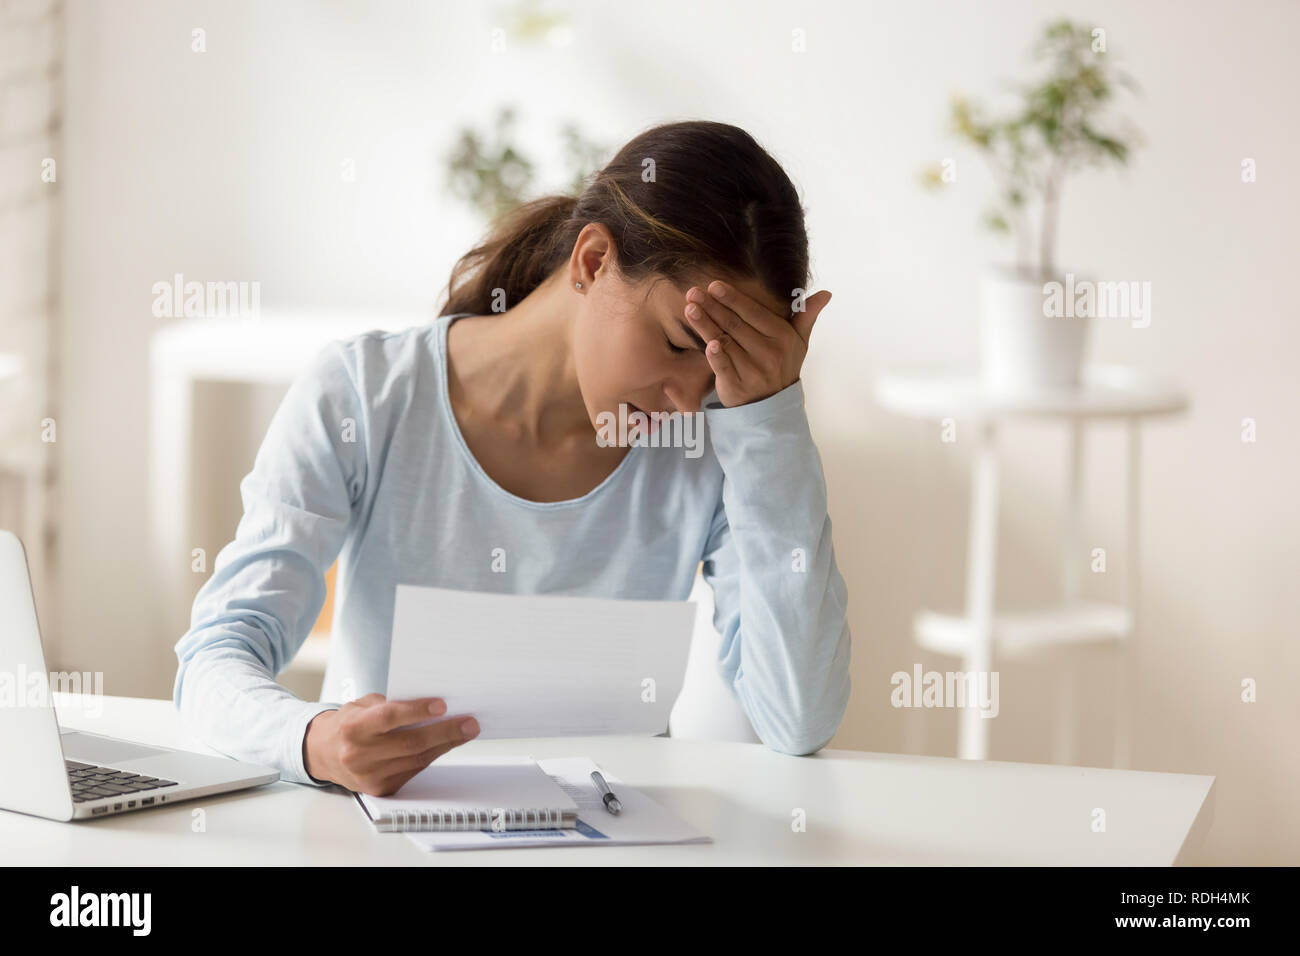 Upset stressed woman reading notification, bad news receiving Stock Photo